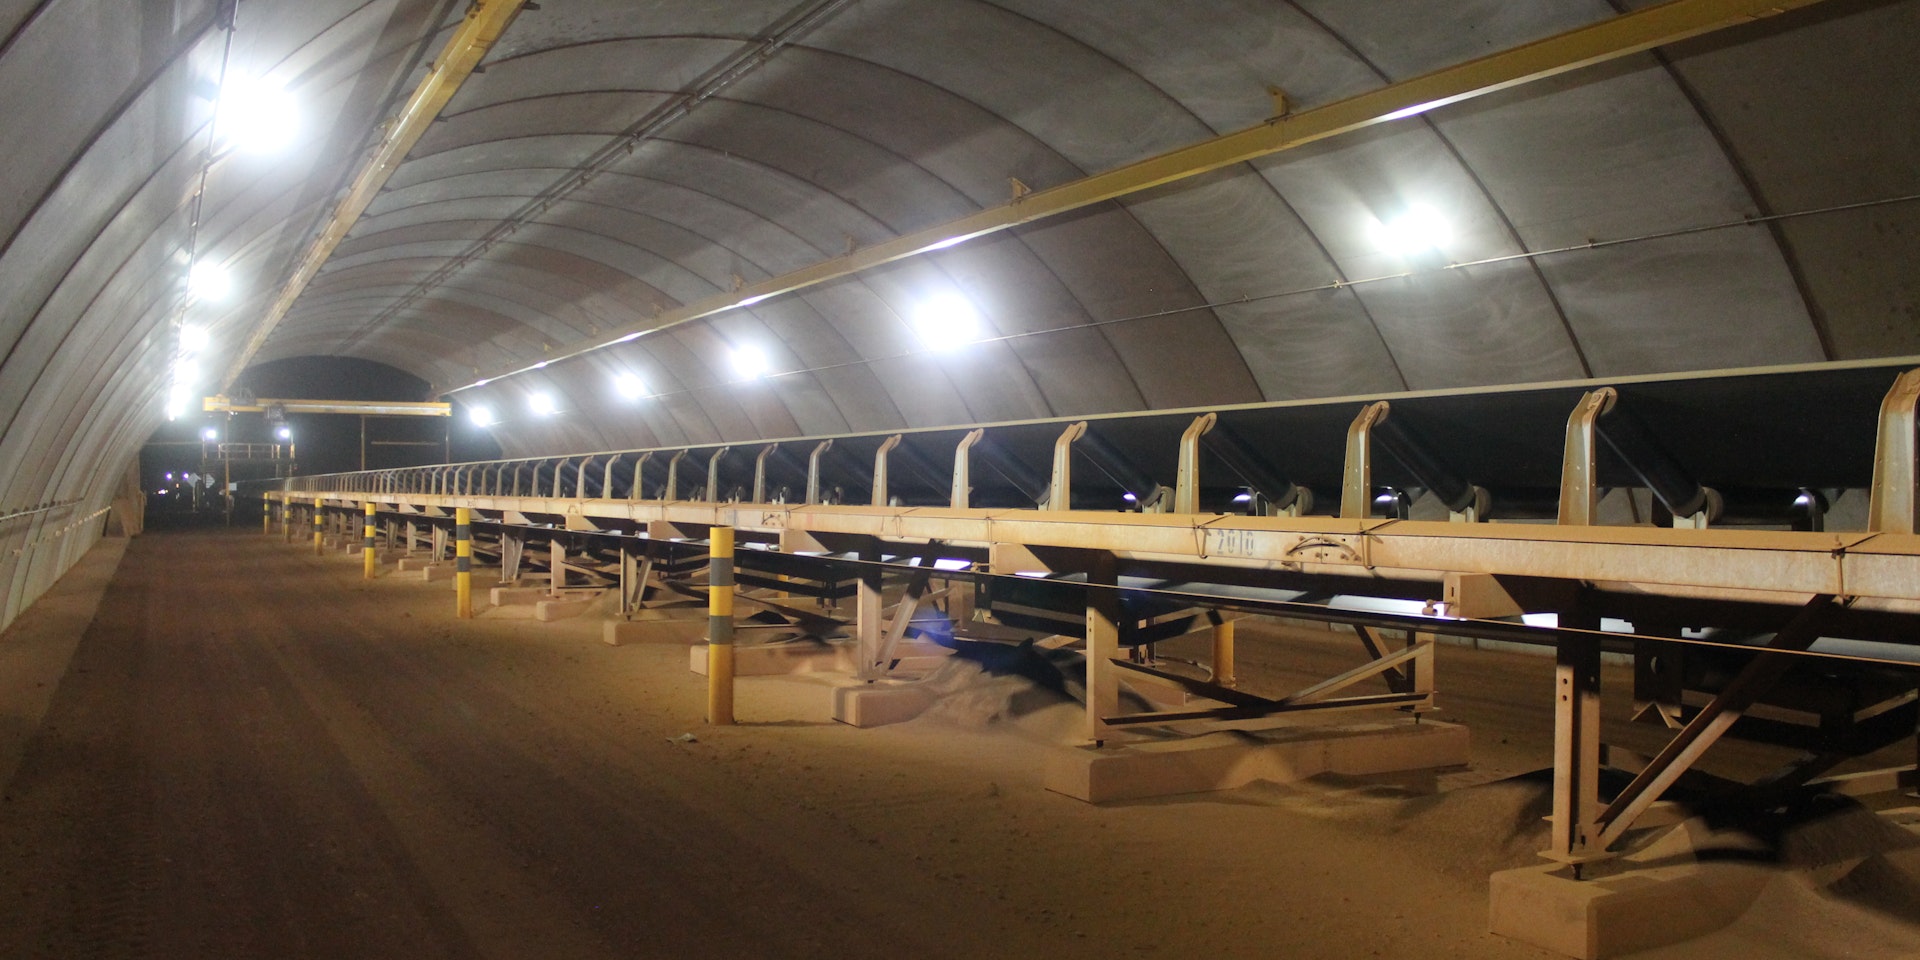 ExTNR LED Conveyor/Area light in application, installed in an industrial tunnel